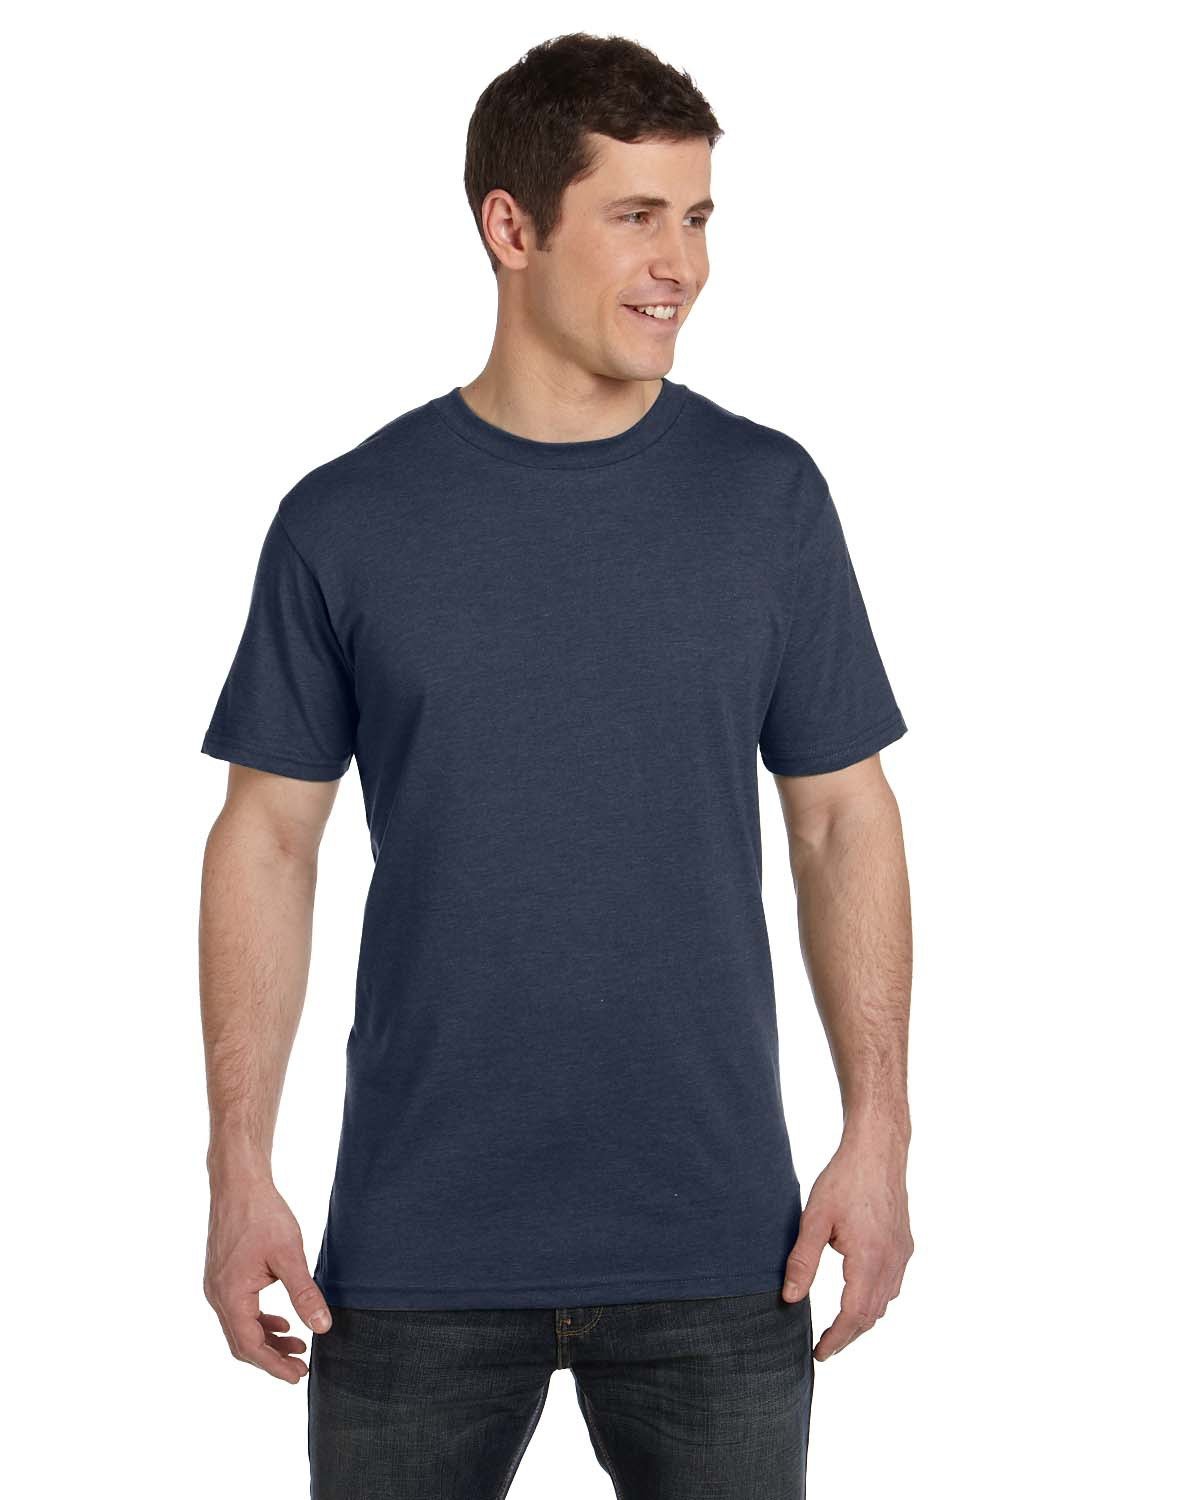 econscious Men's Blended Eco T-Shirt WATER 